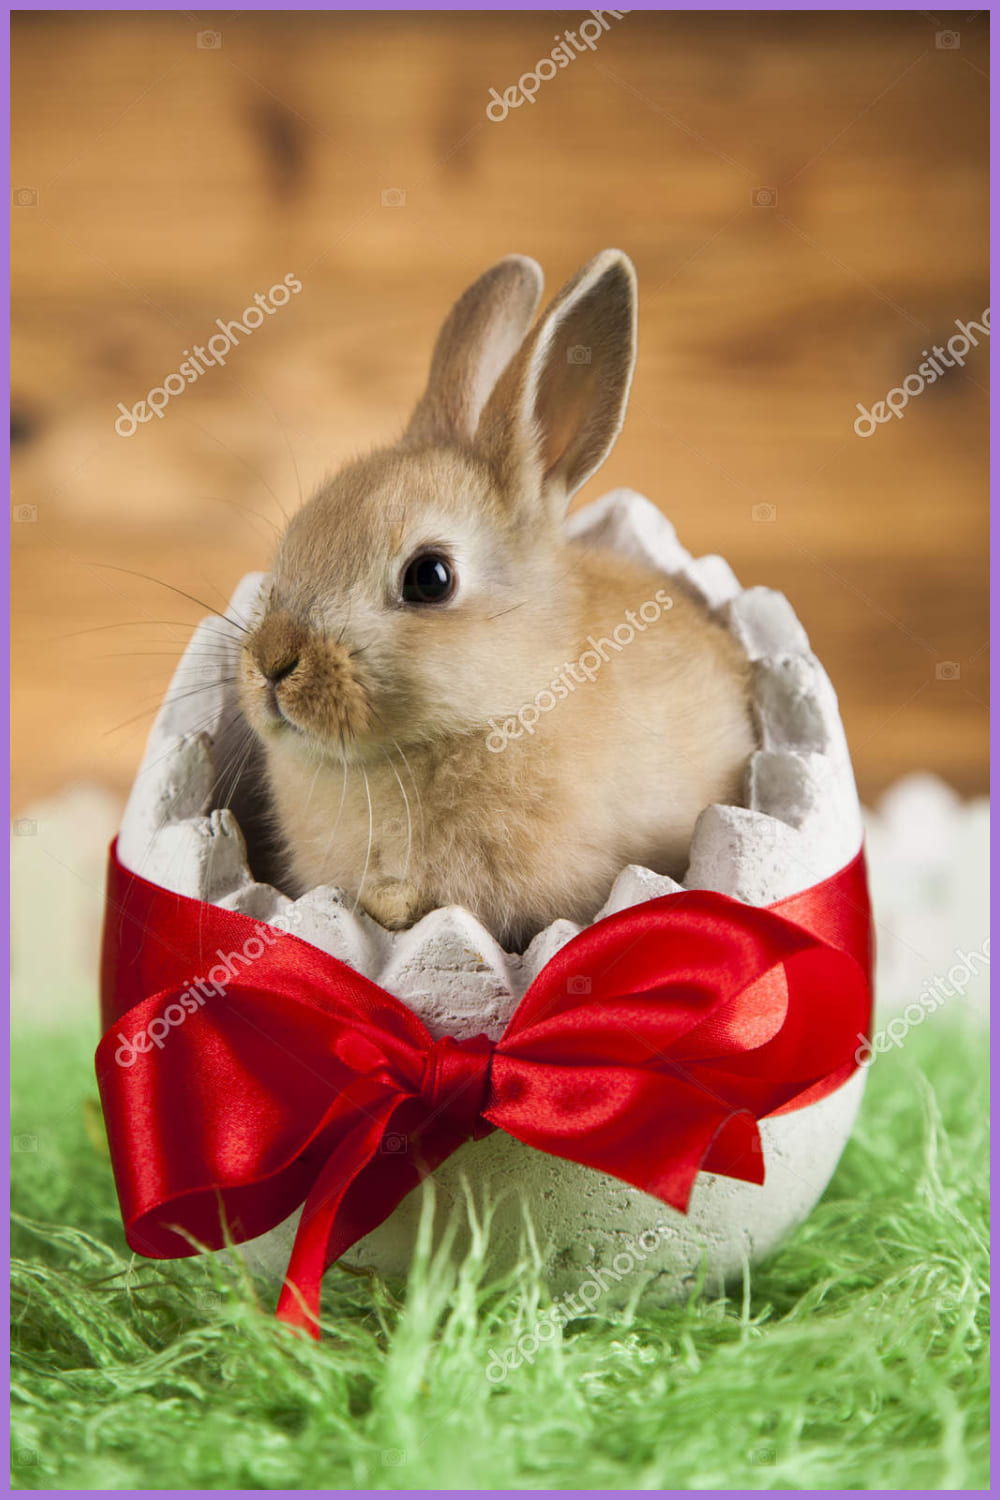 Rabbit in an egg with a red bow.